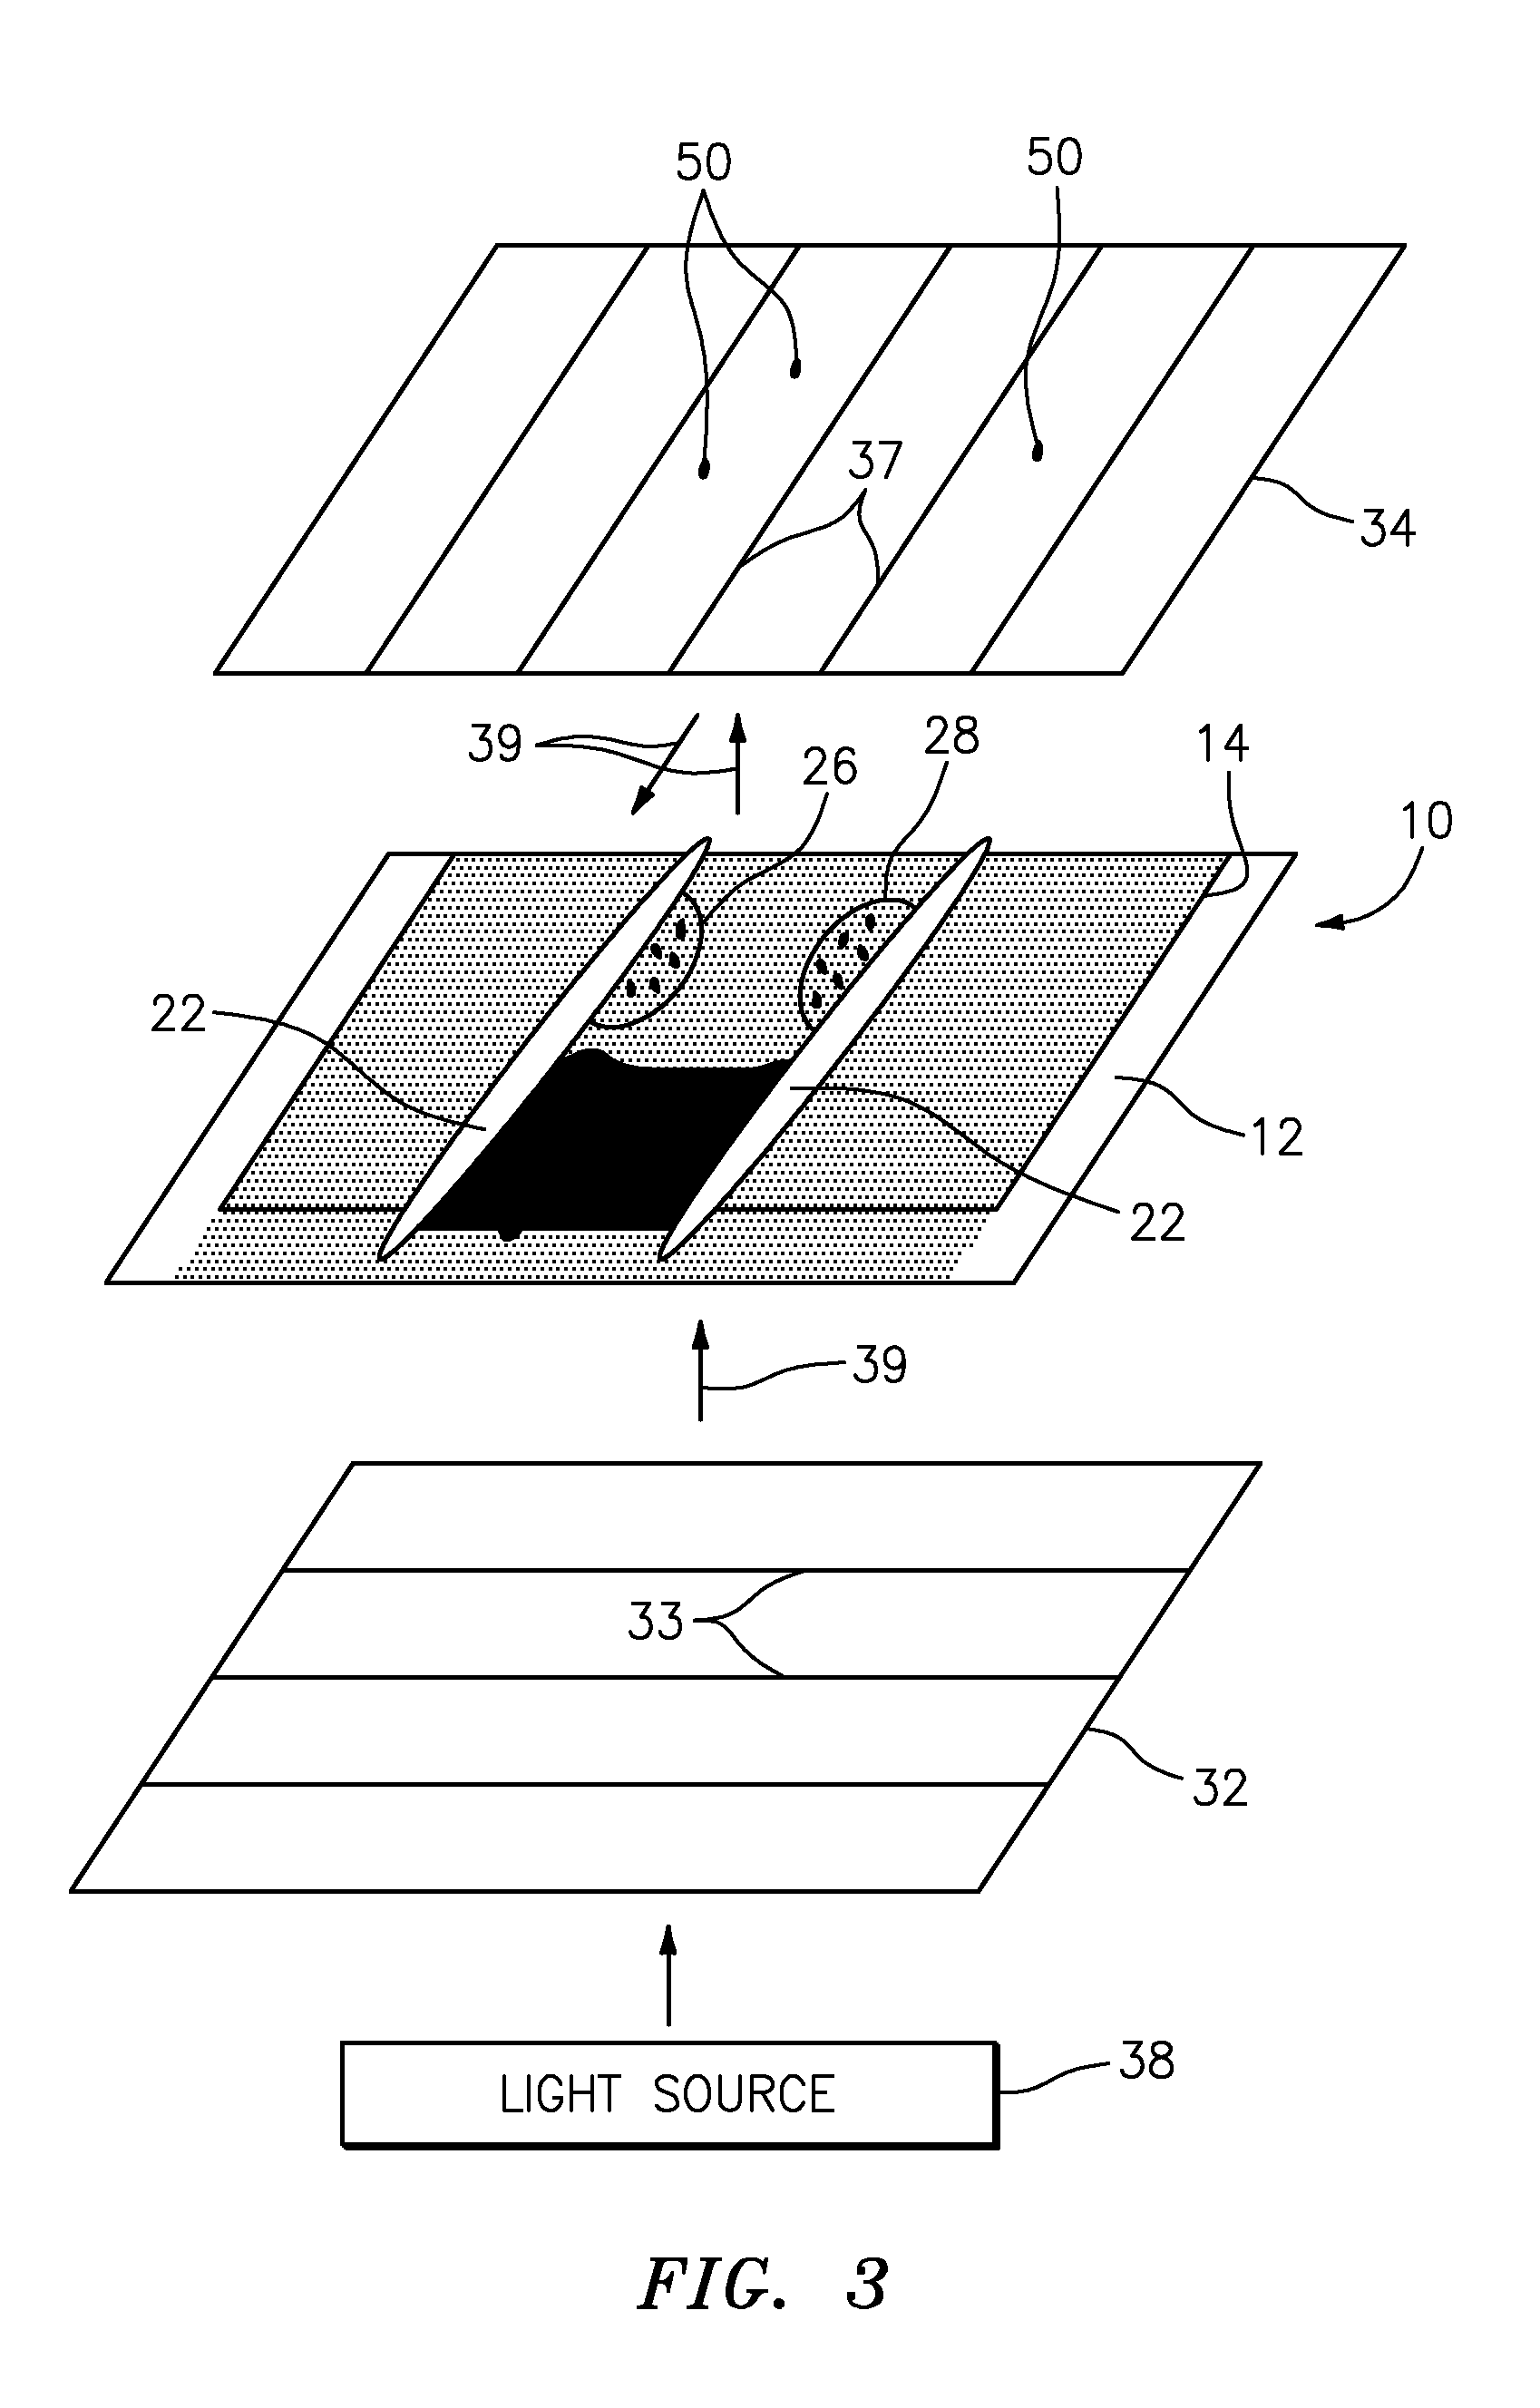 Method and apparatus for detecting the presence of anisotropic crystals and hemozoin producing parasites in liquid blood